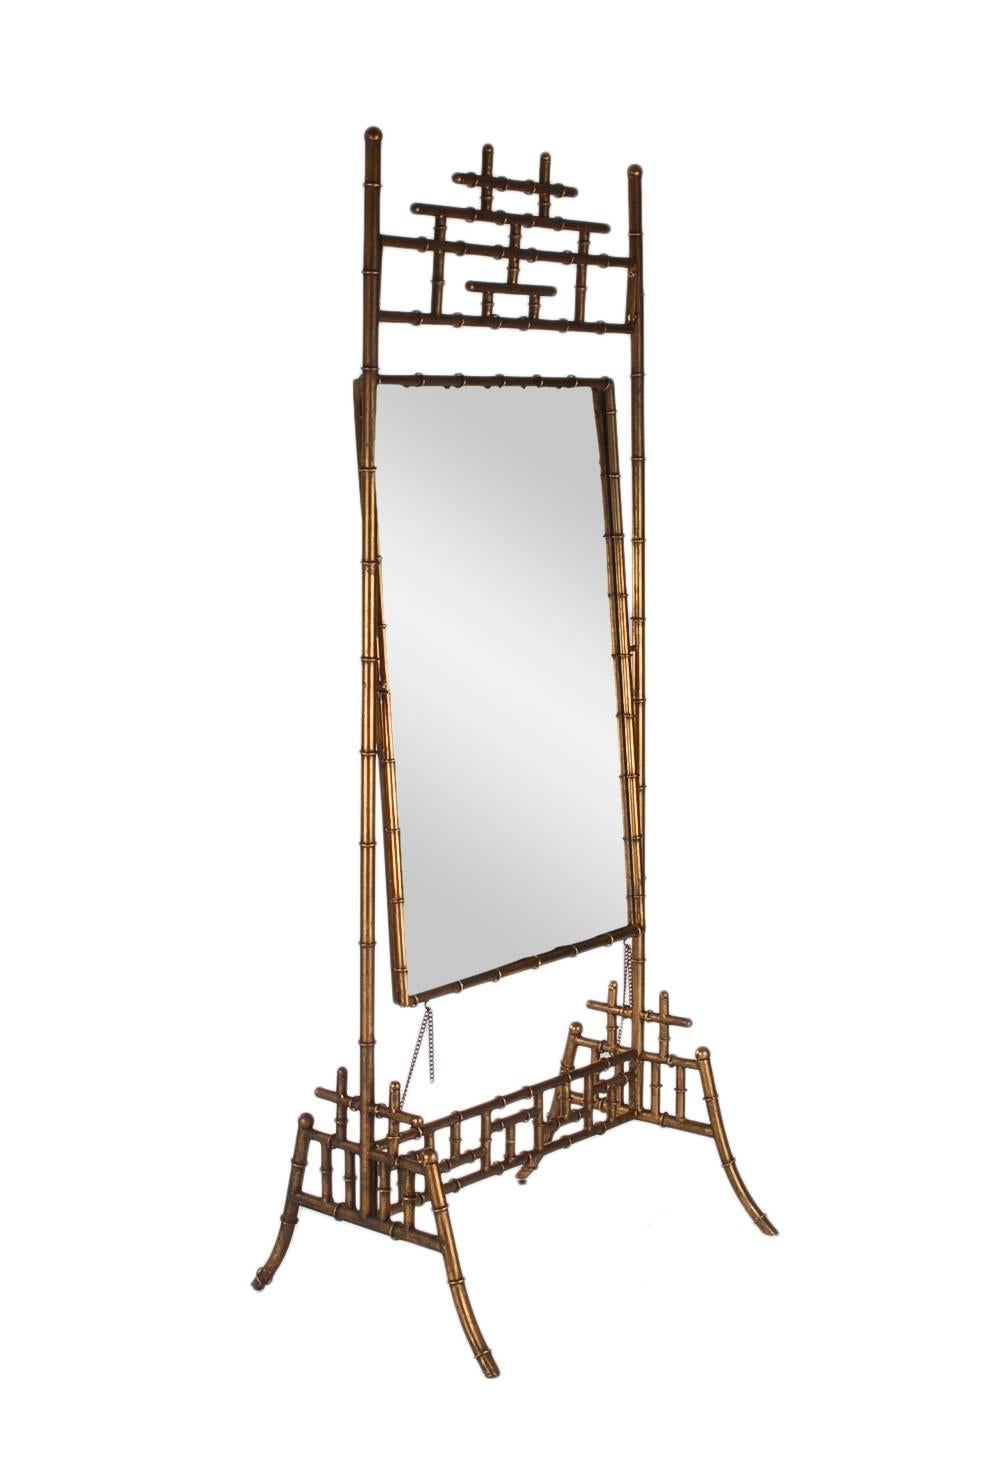 A large stately design Cheval mirror. It features a beautifully gold finish faux bamboo frame, with large pivoting mirror.